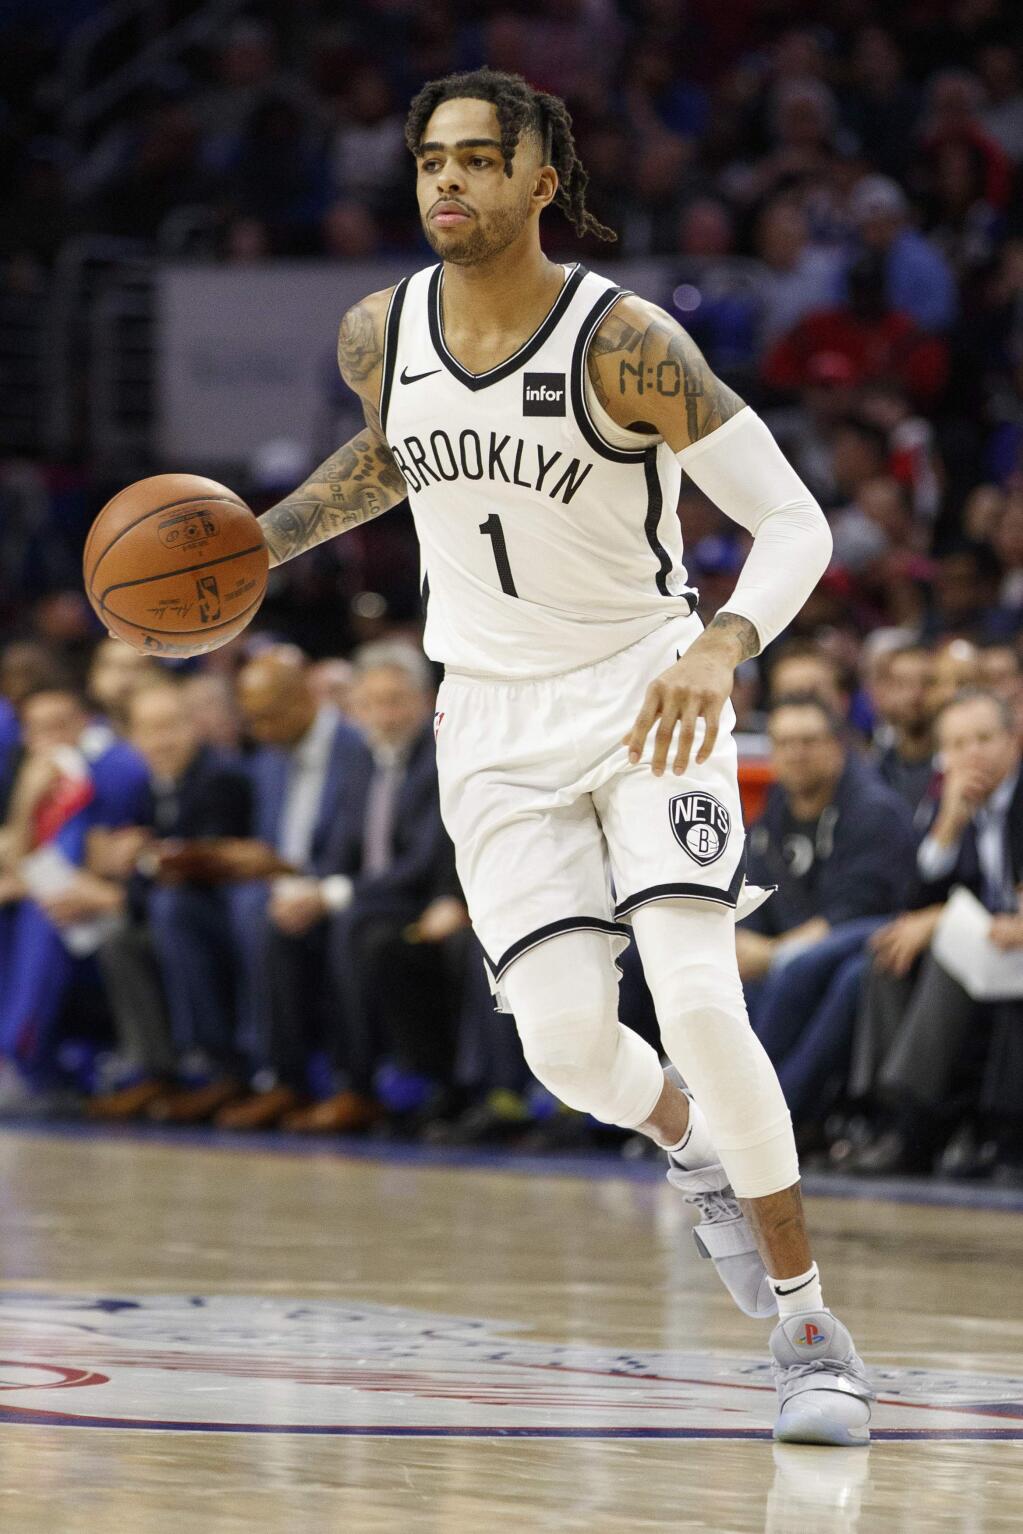 The Brooklyn Nets' D'Angelo Russell in action during the second half in Game 2 of a first-round playoff series against the Philadelphia 76ers, Monday, April 15, 2019, in Philadelphia. Russell is now with the Warriors. (AP Photo/Chris Szagola)